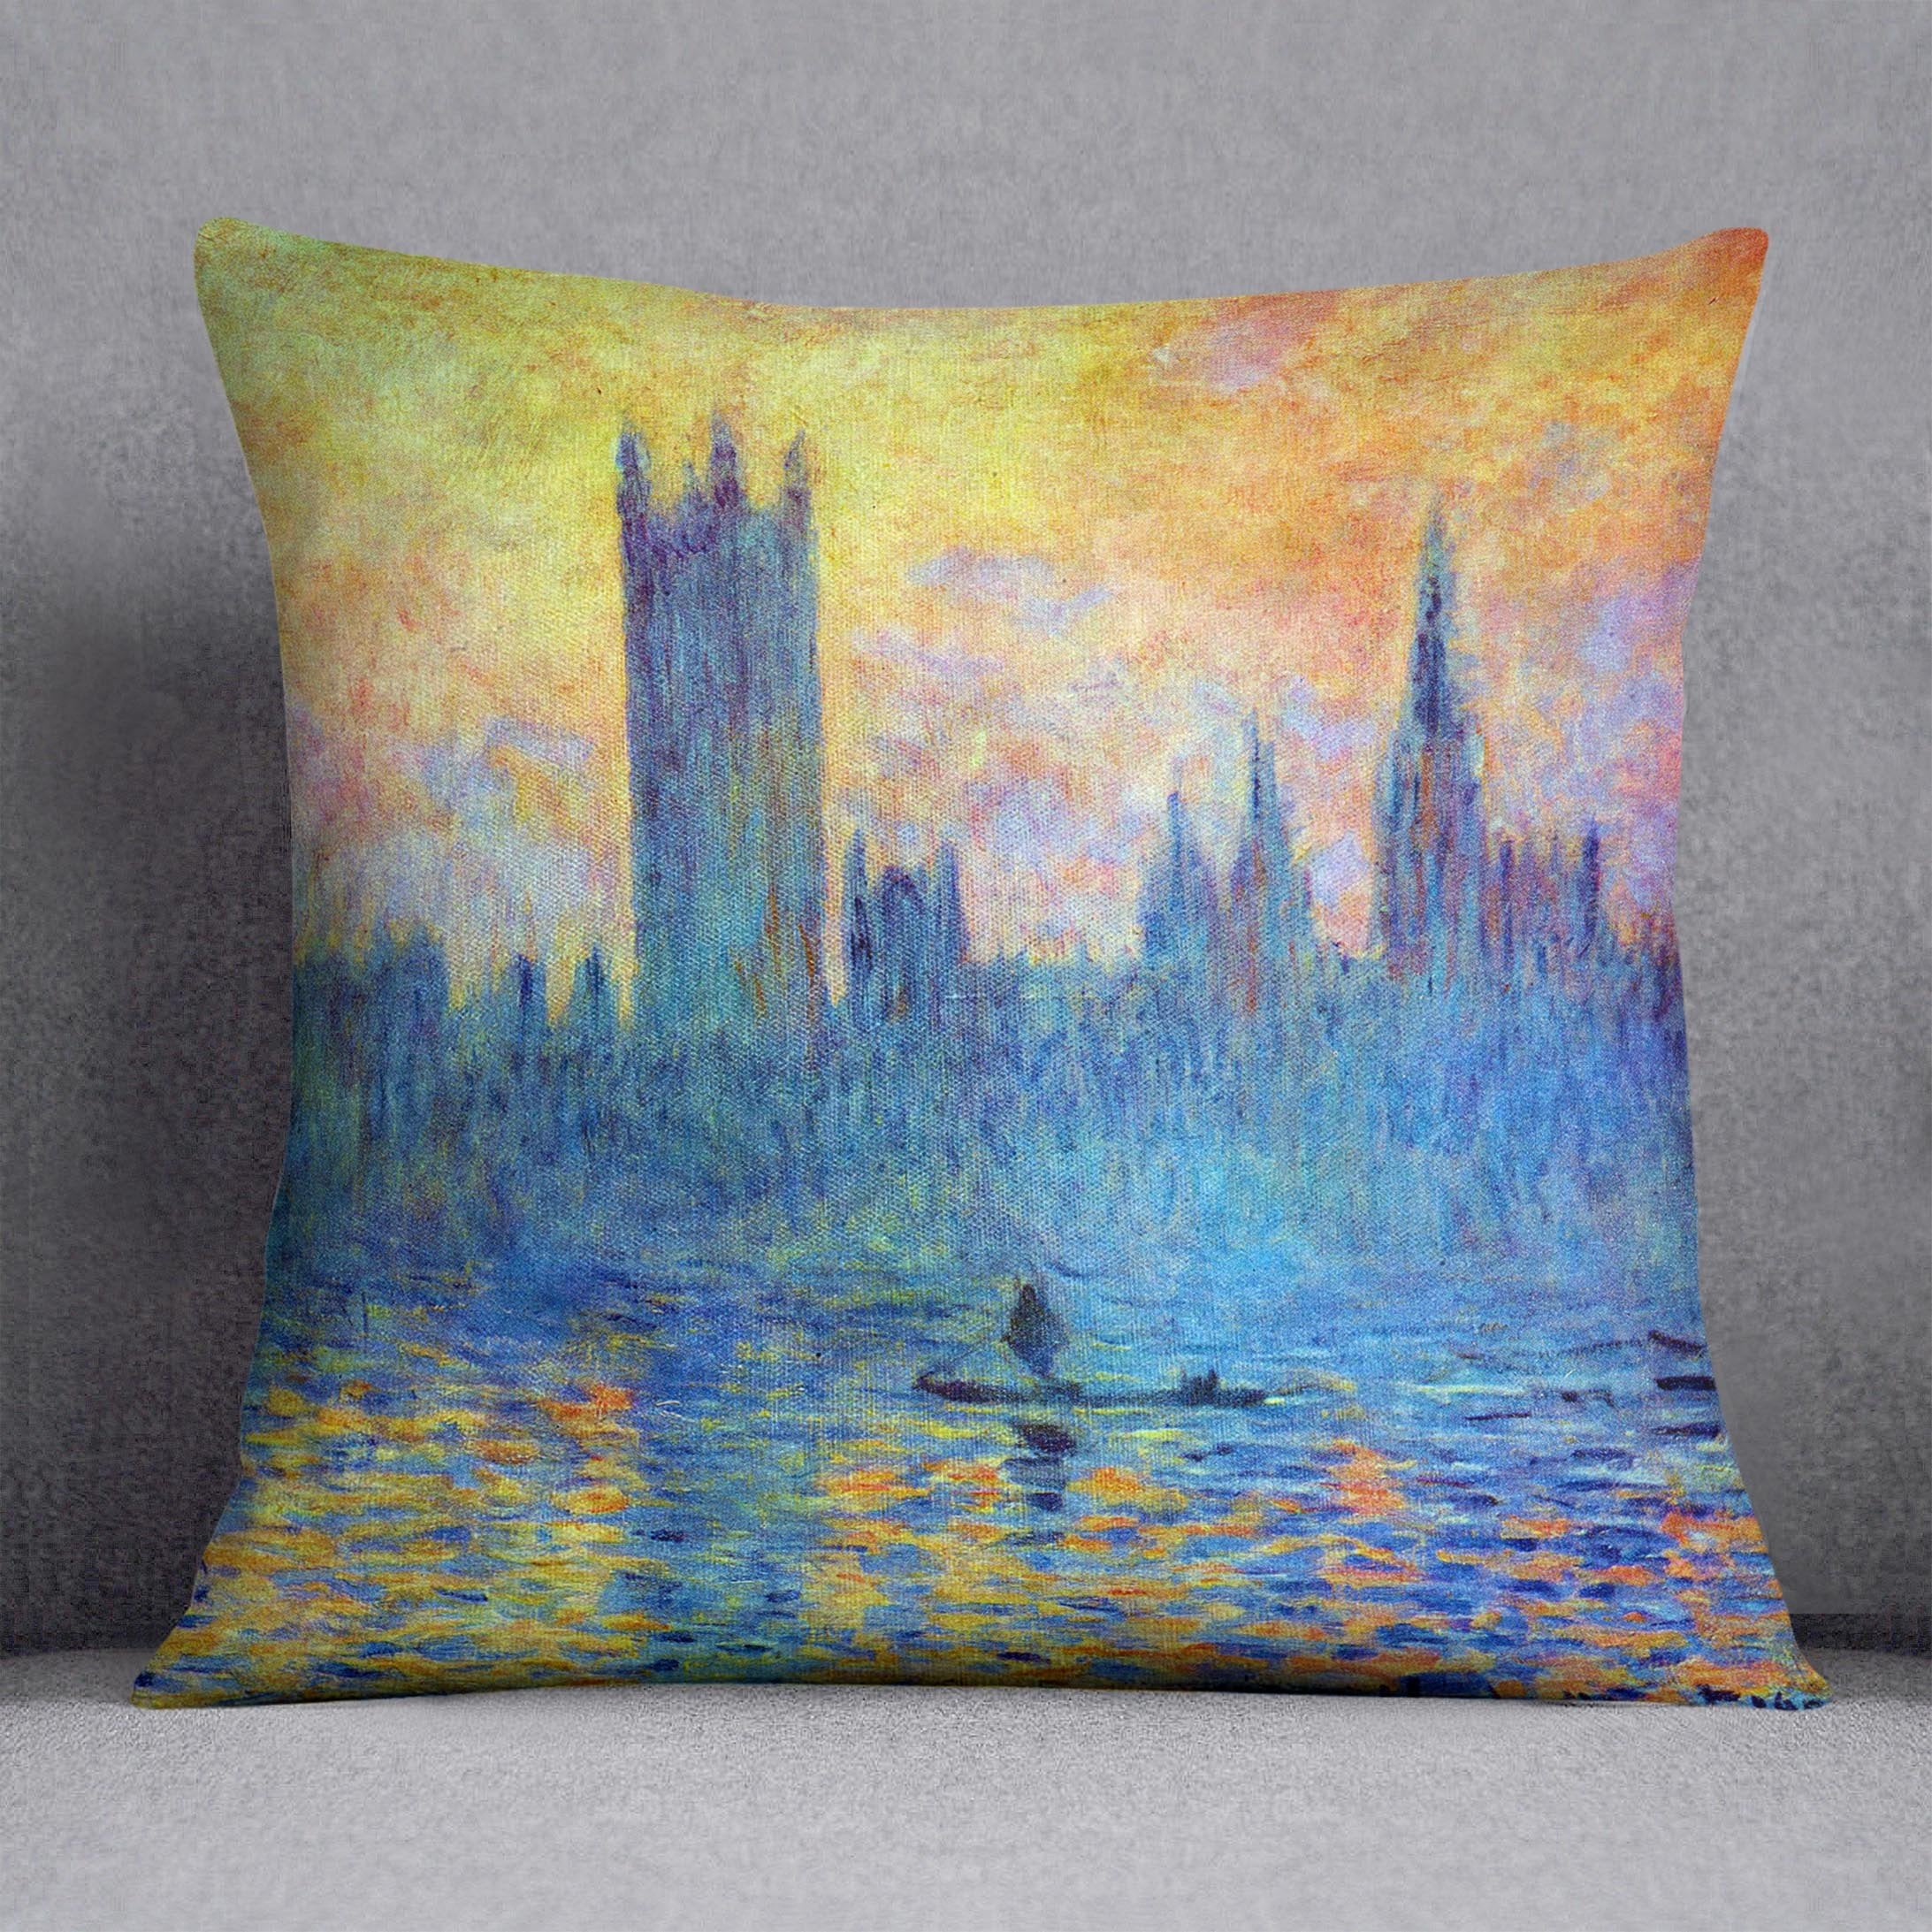 London Parliament in Winter by Monet Throw Pillow